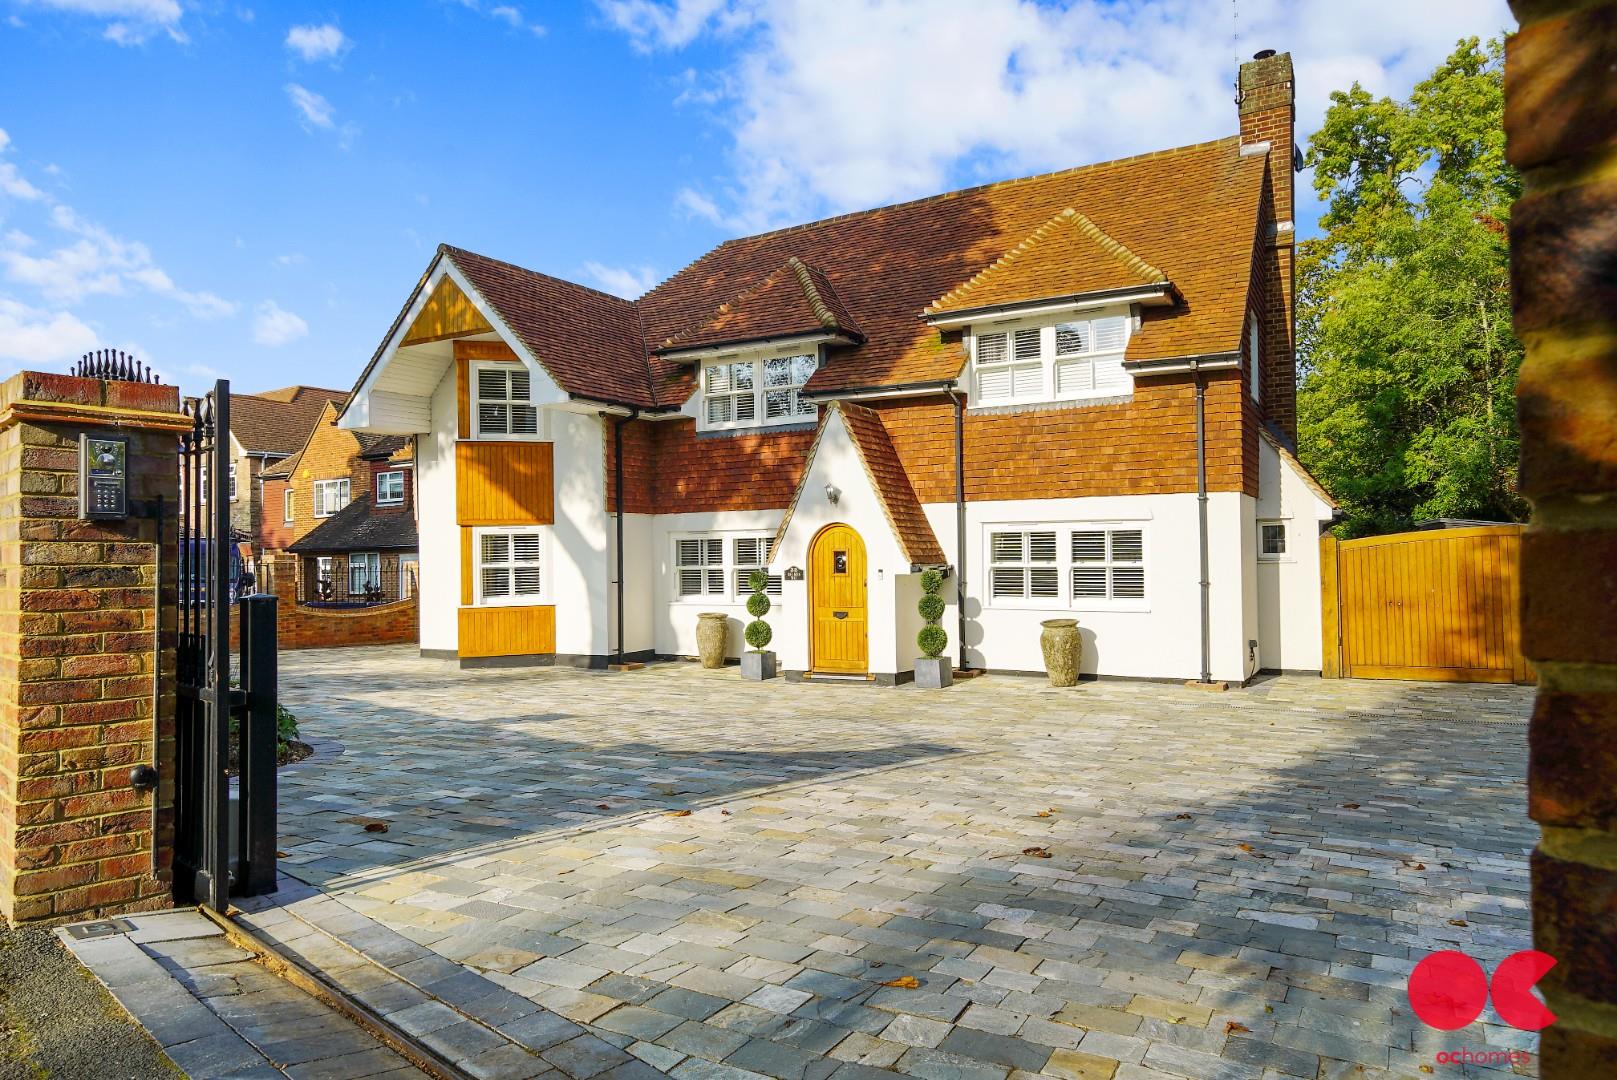 6 bed detached house for sale in Nelmes Way, Hornchurch - Property Image 1